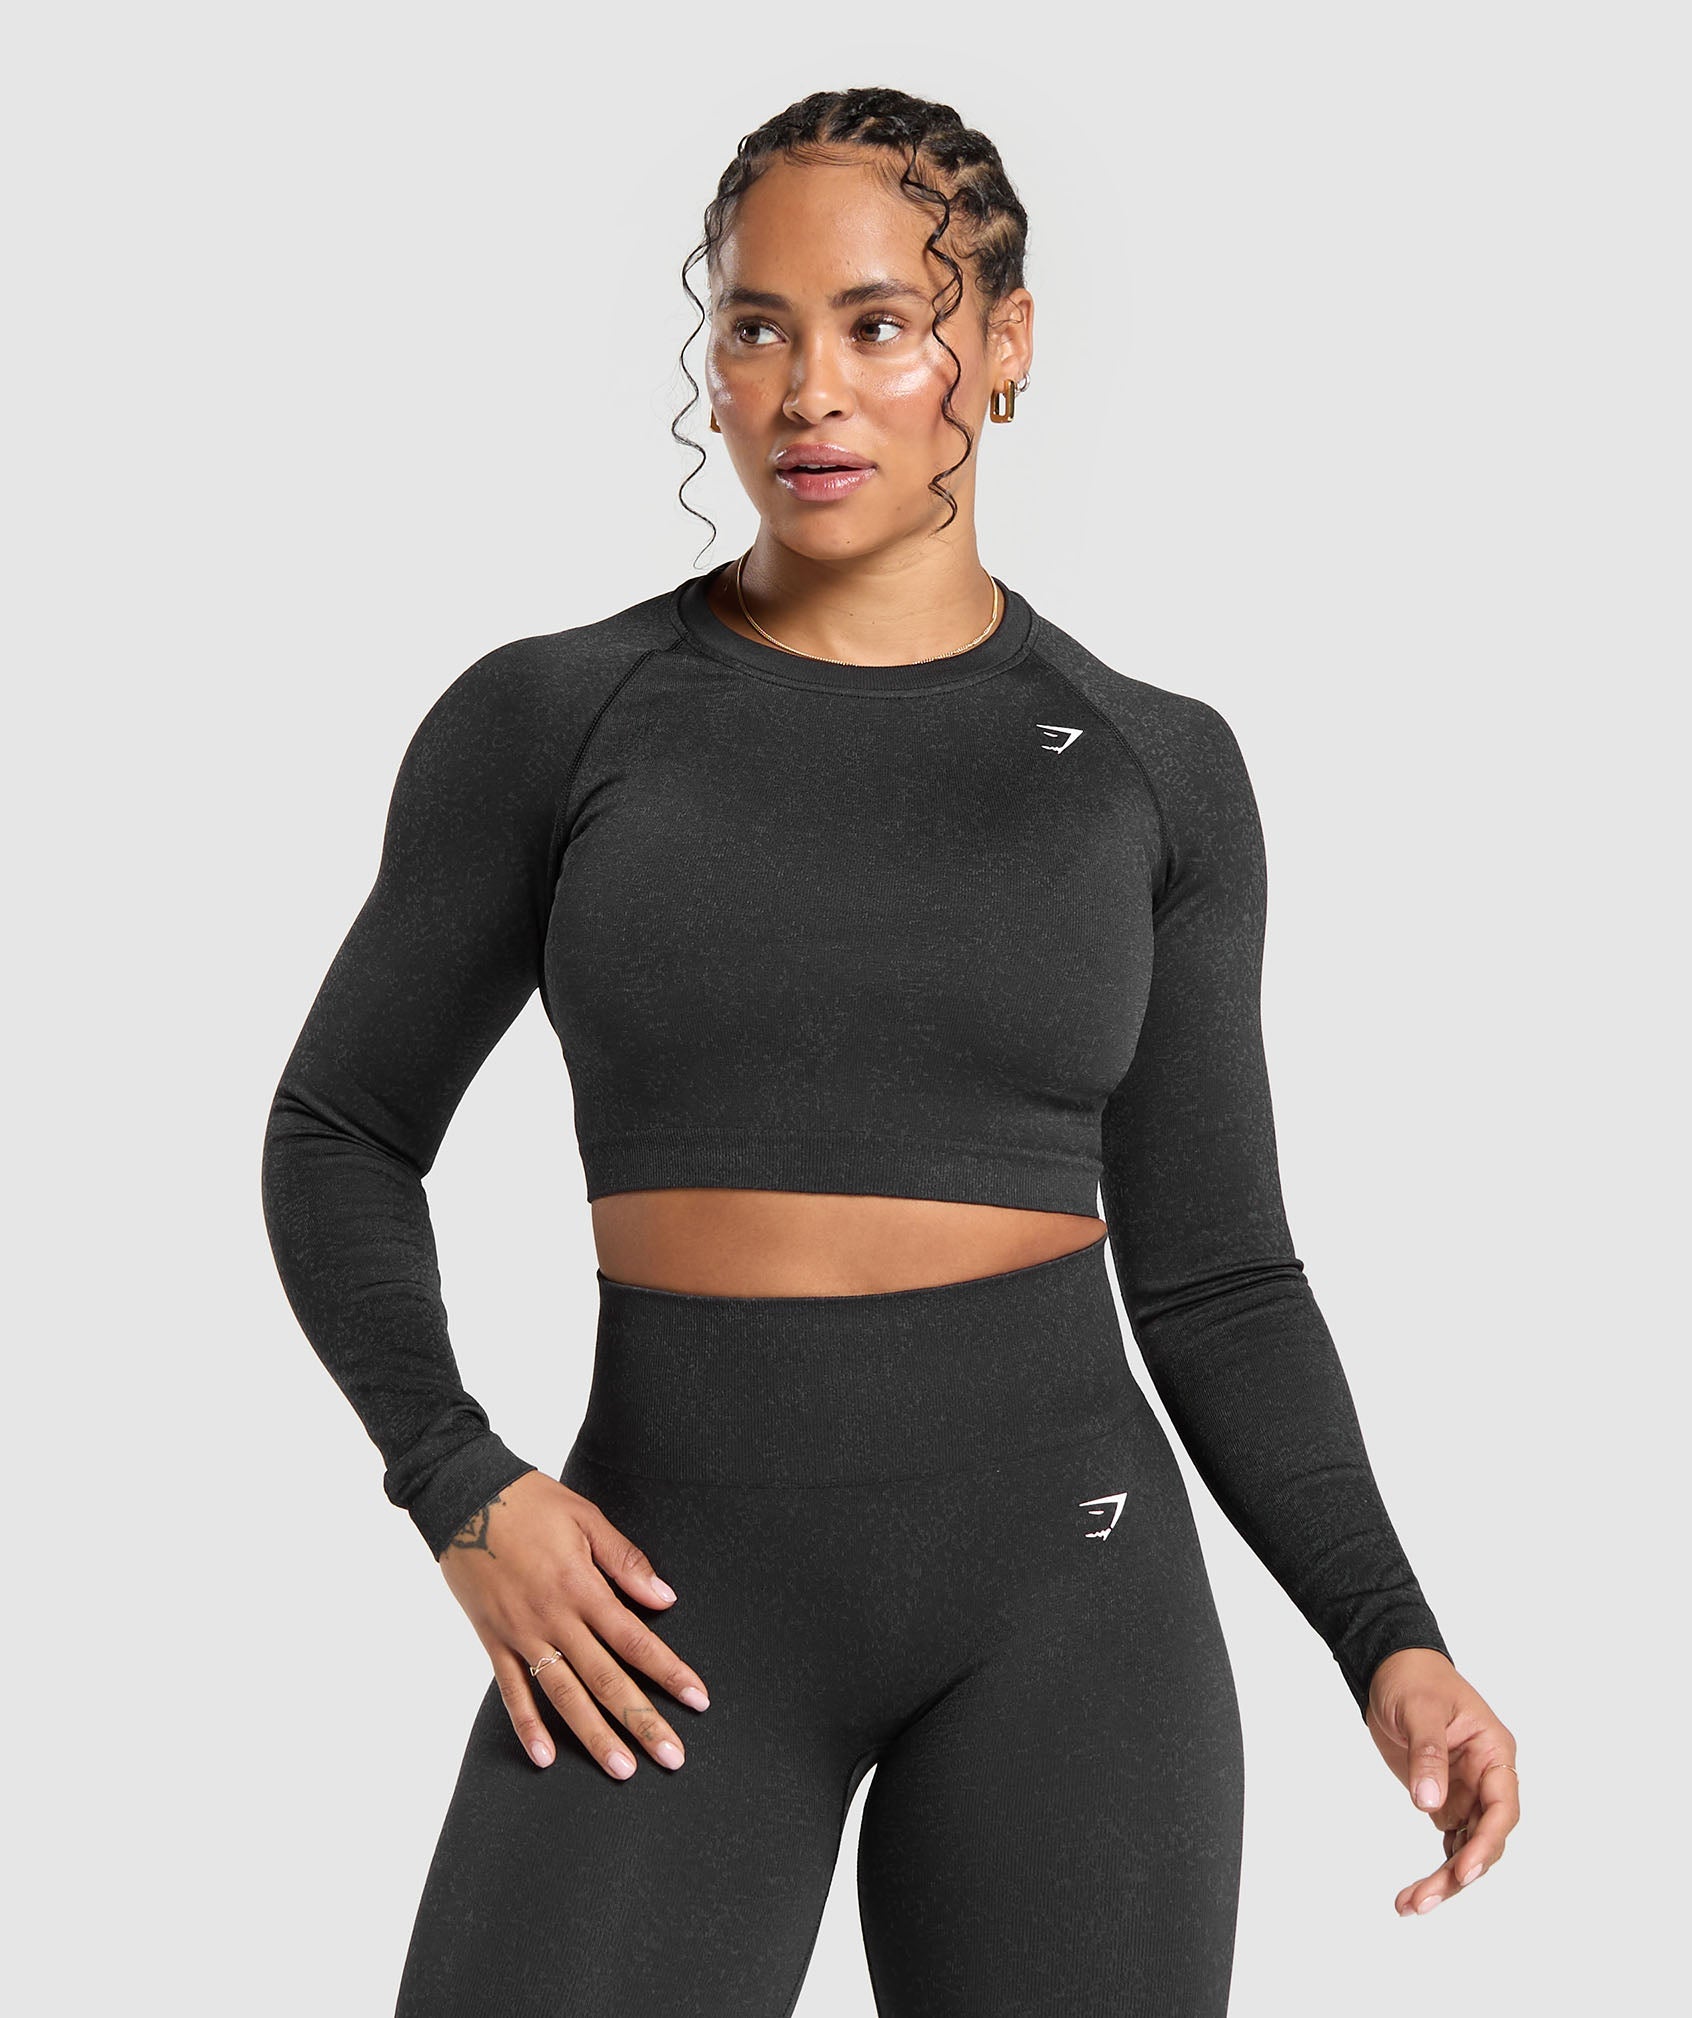 Adapt Fleck Seamless Long Sleeve Crop Top in Mineral | Black is out of stock